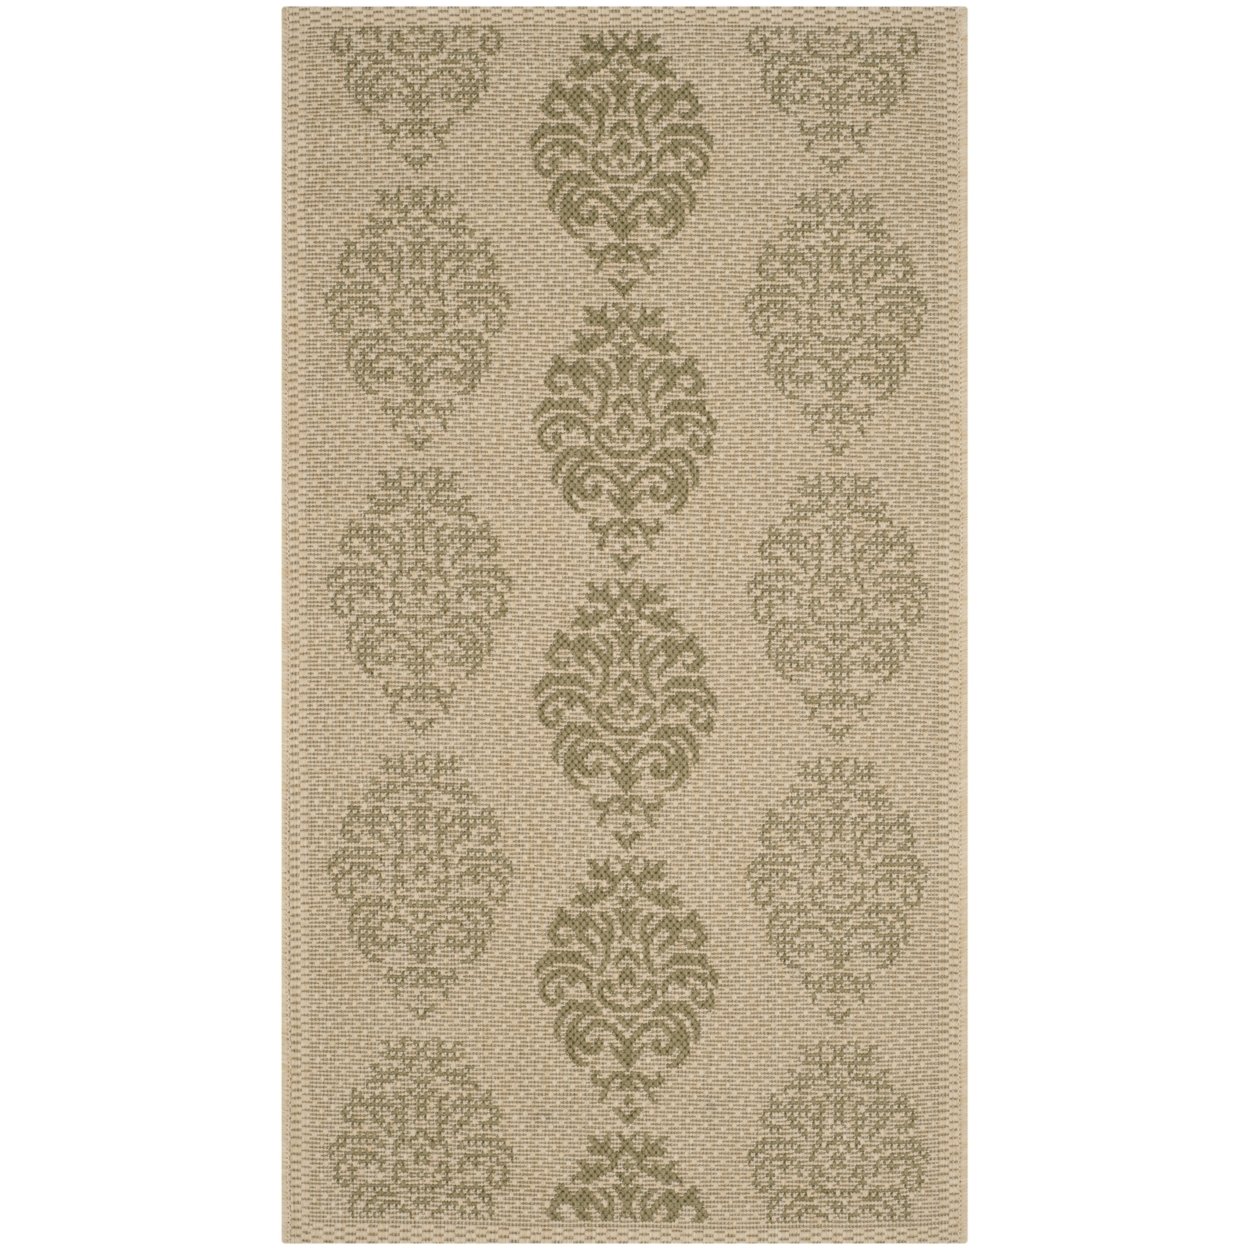 SAFAVIEH Outdoor CY2720-1E01 Courtyard Natural / Olive Rug - 4' X 5' 7